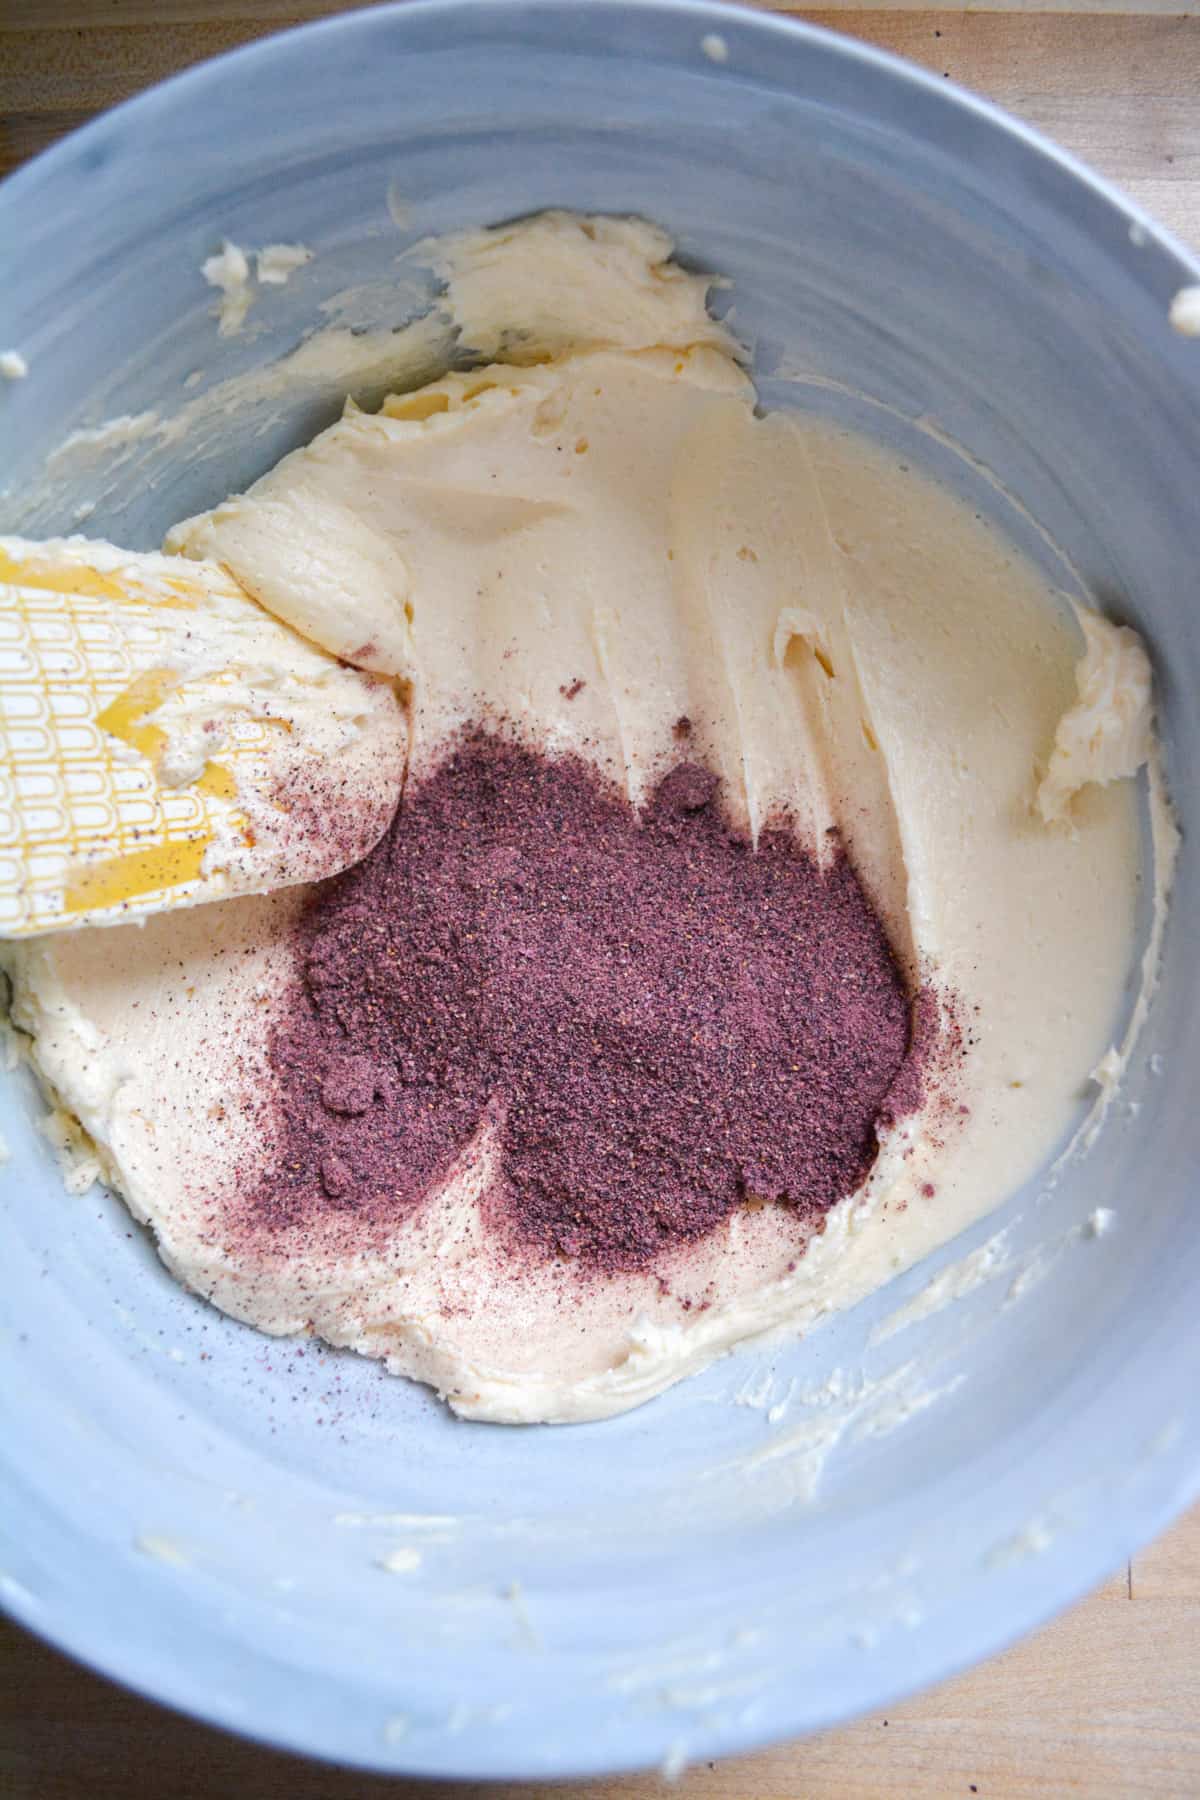 Creamed butter in a bowl with blueberry powder.